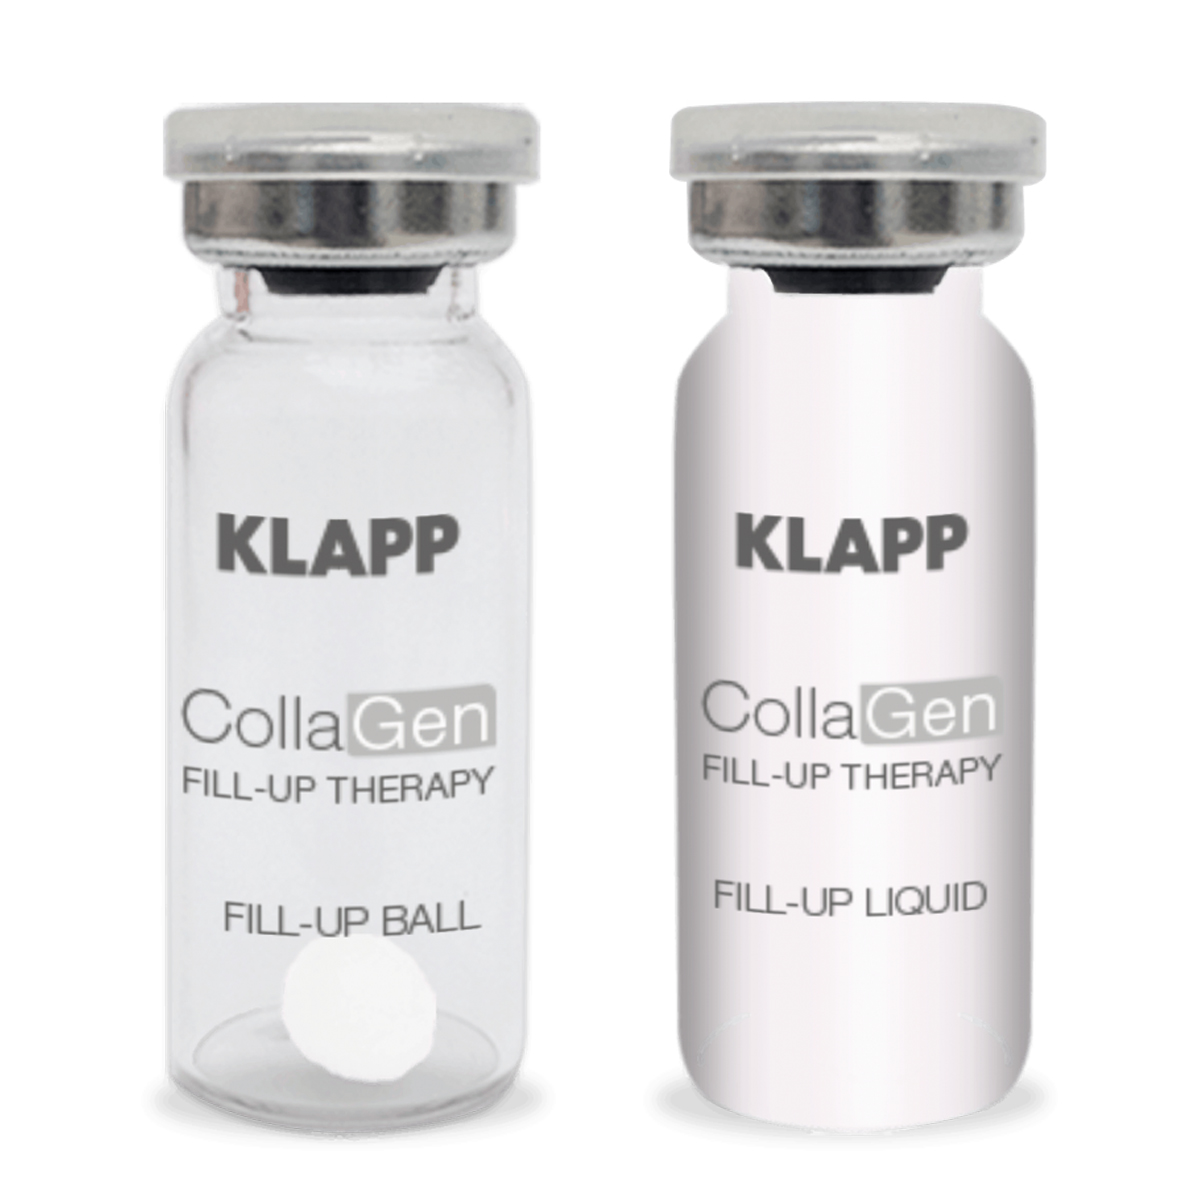 KLAPP Collagen Refill Set 2 Bälle 2x10 ml Fill-Up Therapy